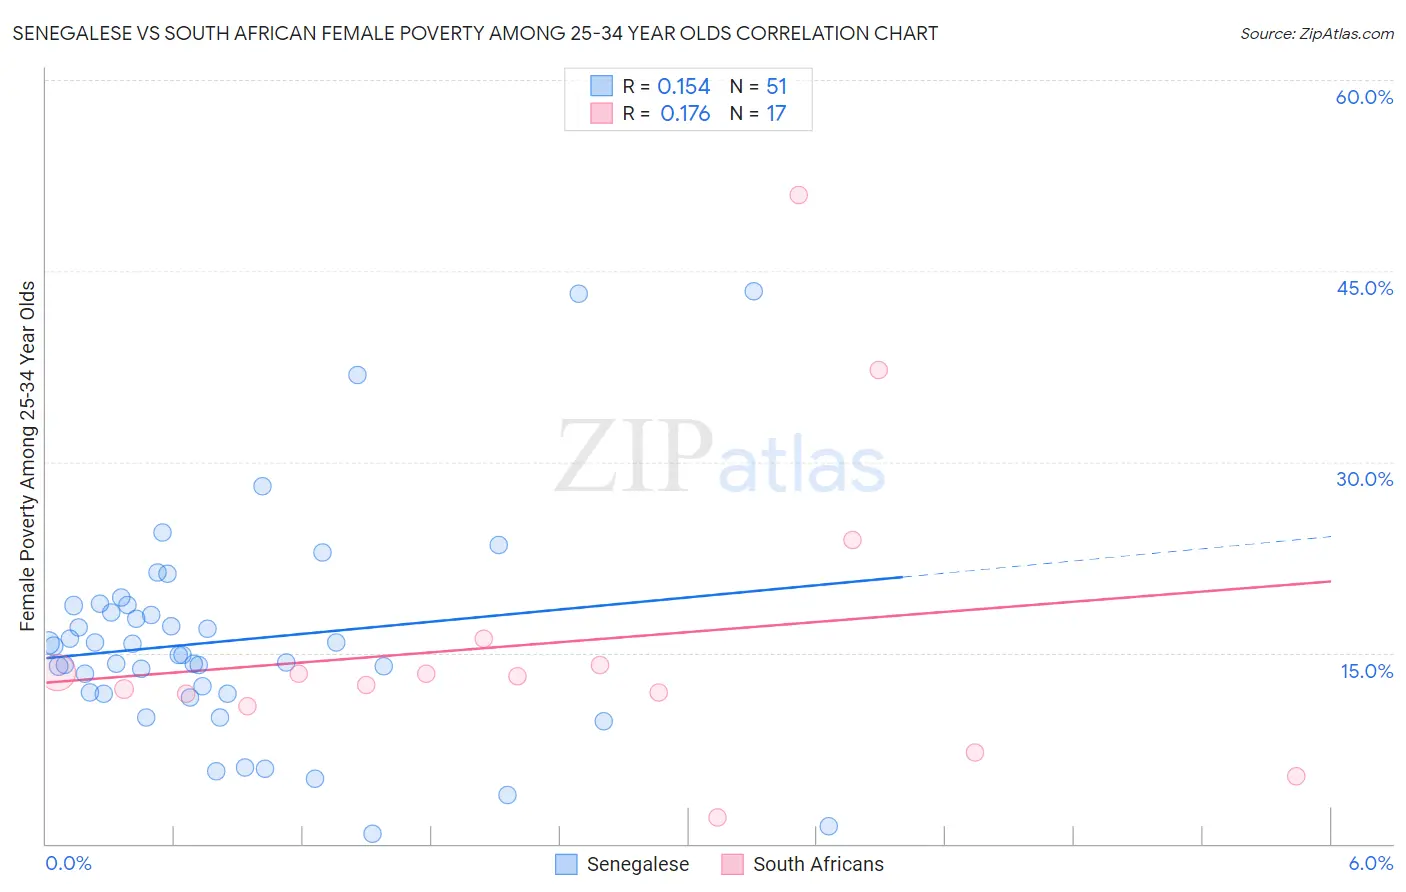 Senegalese vs South African Female Poverty Among 25-34 Year Olds